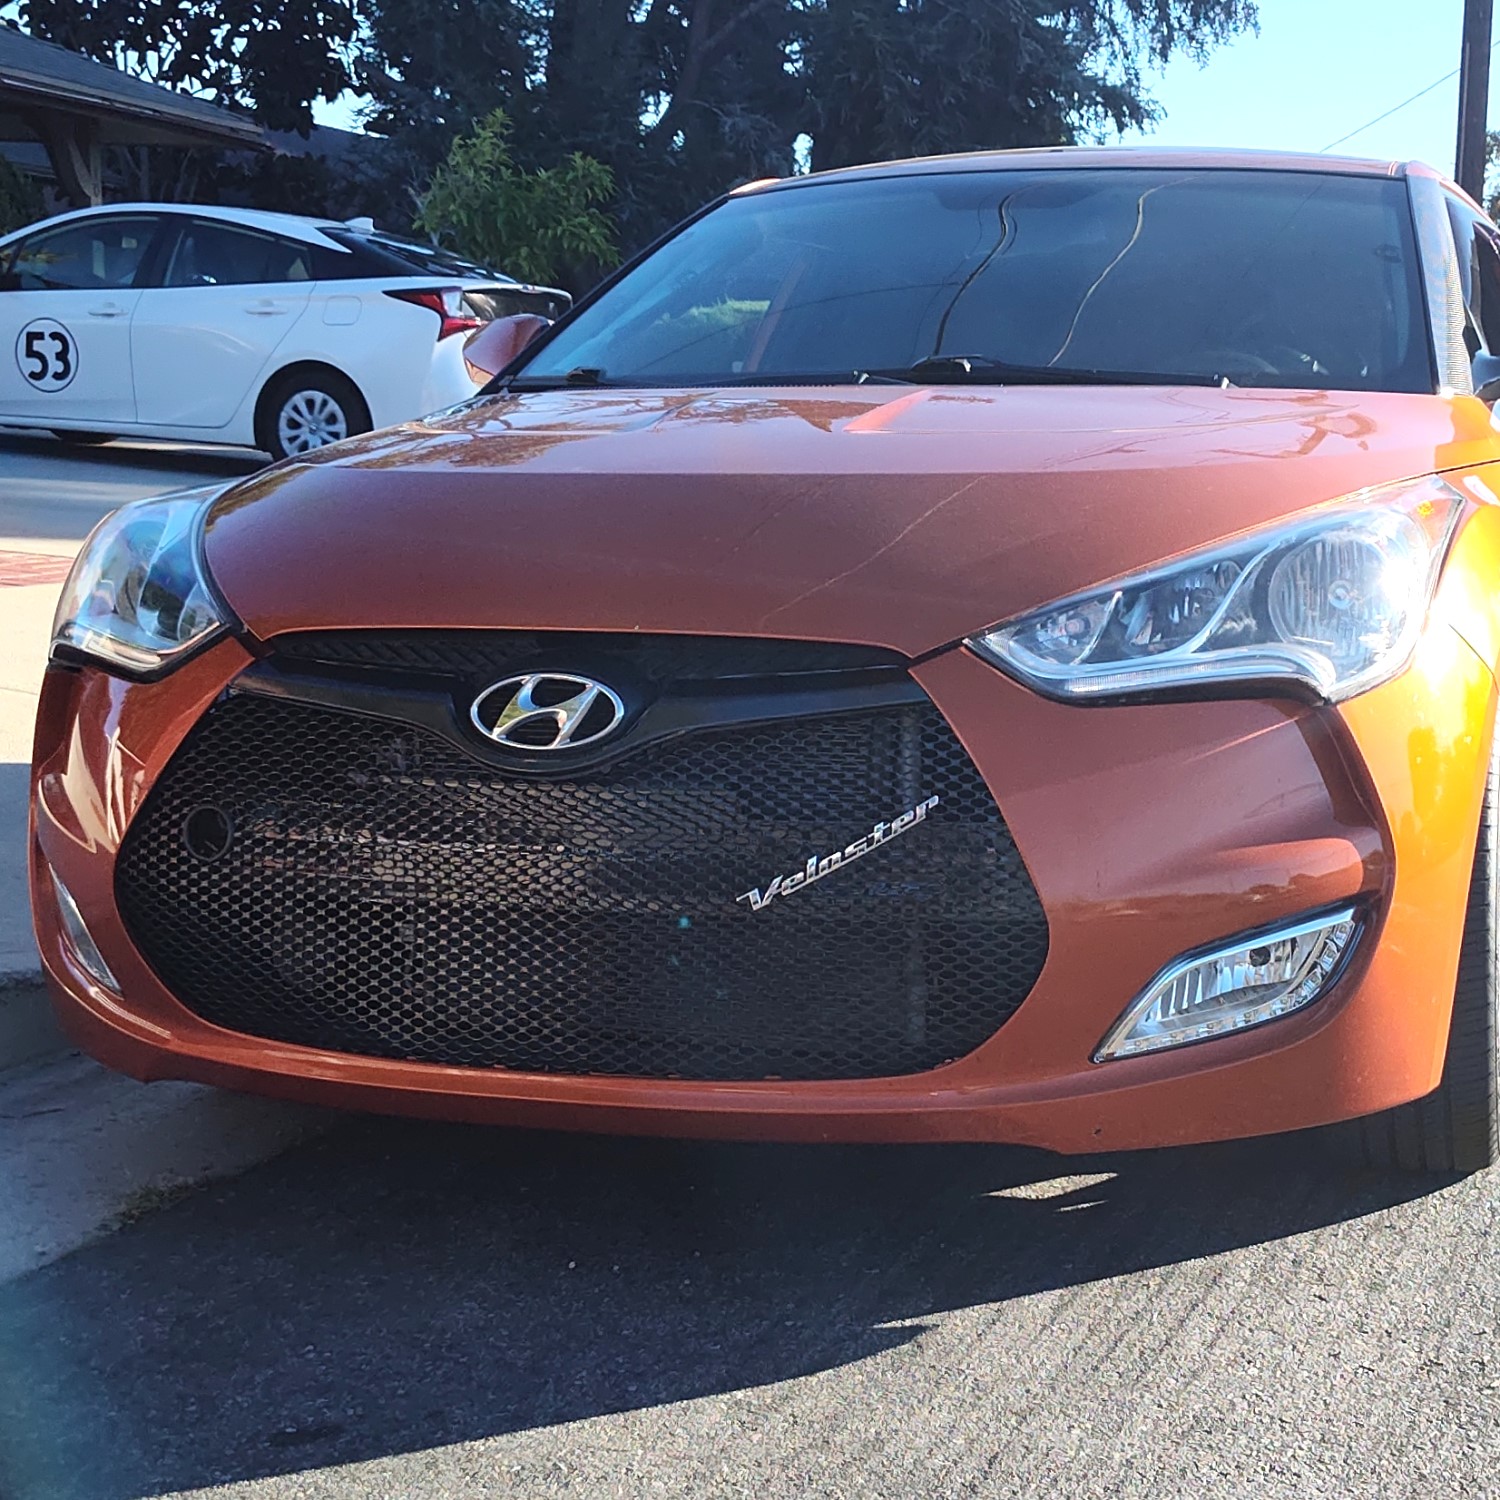 Vitamin C First Gen Veloster Makeover: Whole New Look with New Grille Mod